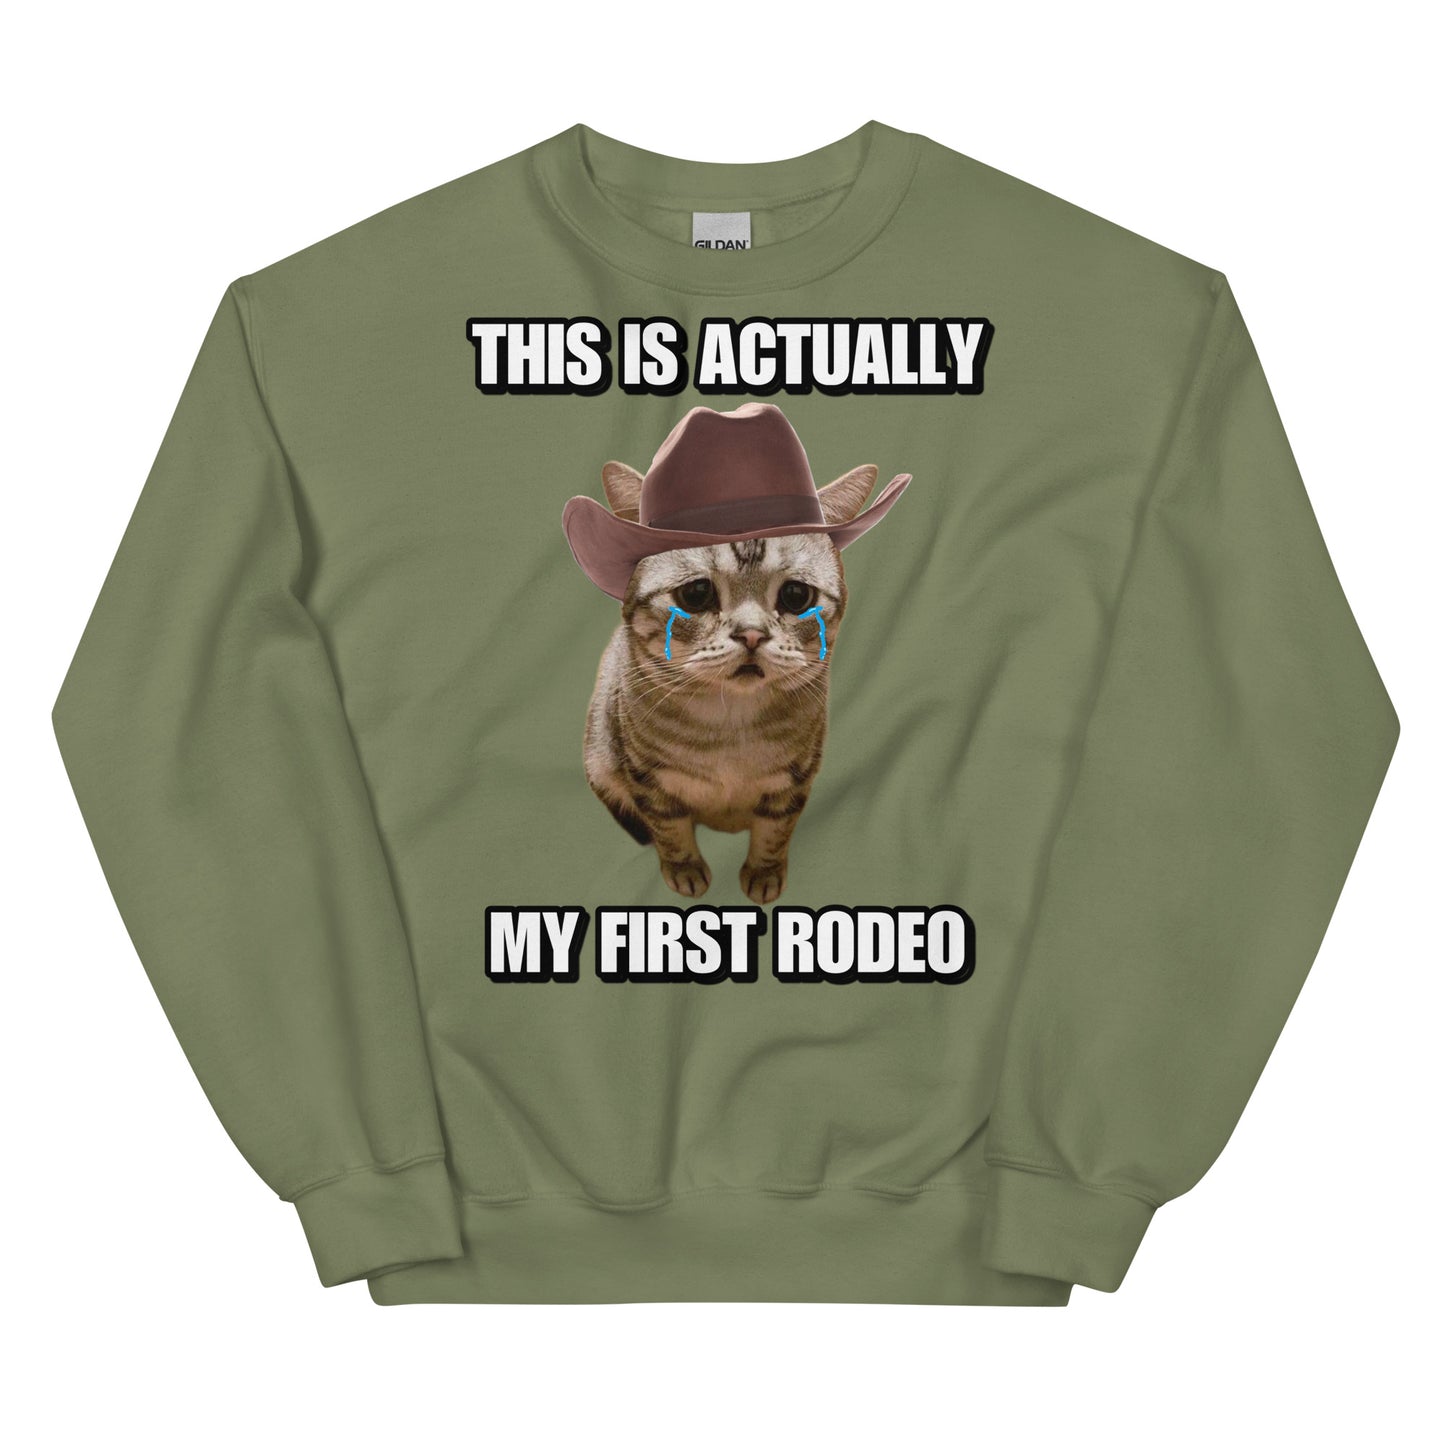 Actually this is my First Rodeo Sweatshirt